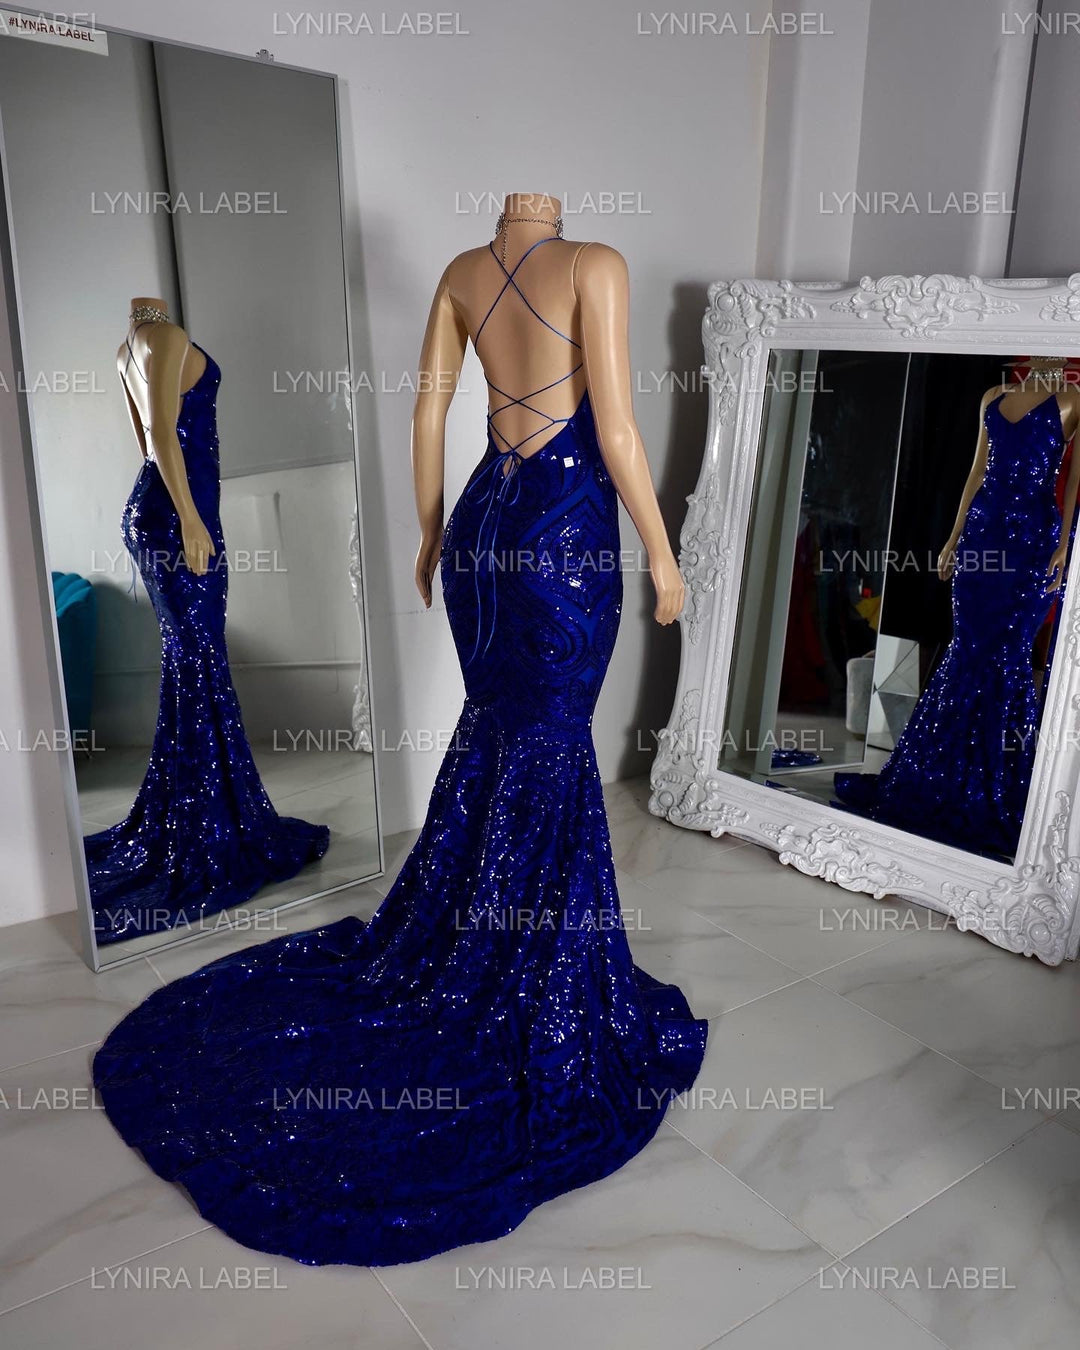 The AALIYAH Sequin Gown